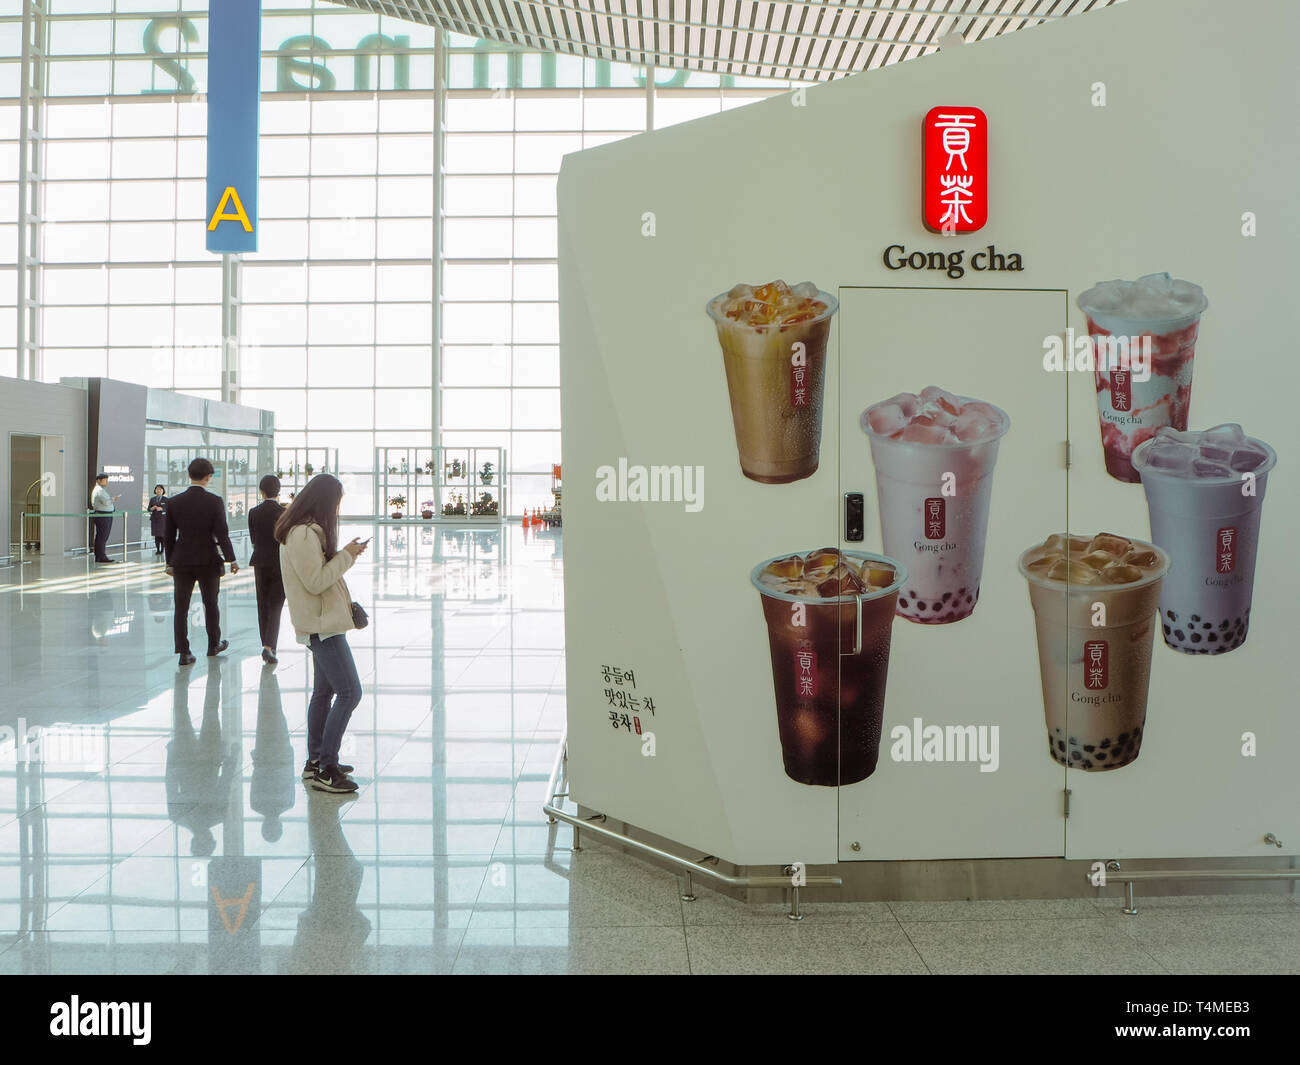 March 2019 - South Korea: Store front of a Taiwanese Gong Cha bubble tea  franchise shop at the Incheon International Airport Stock Photo - Alamy